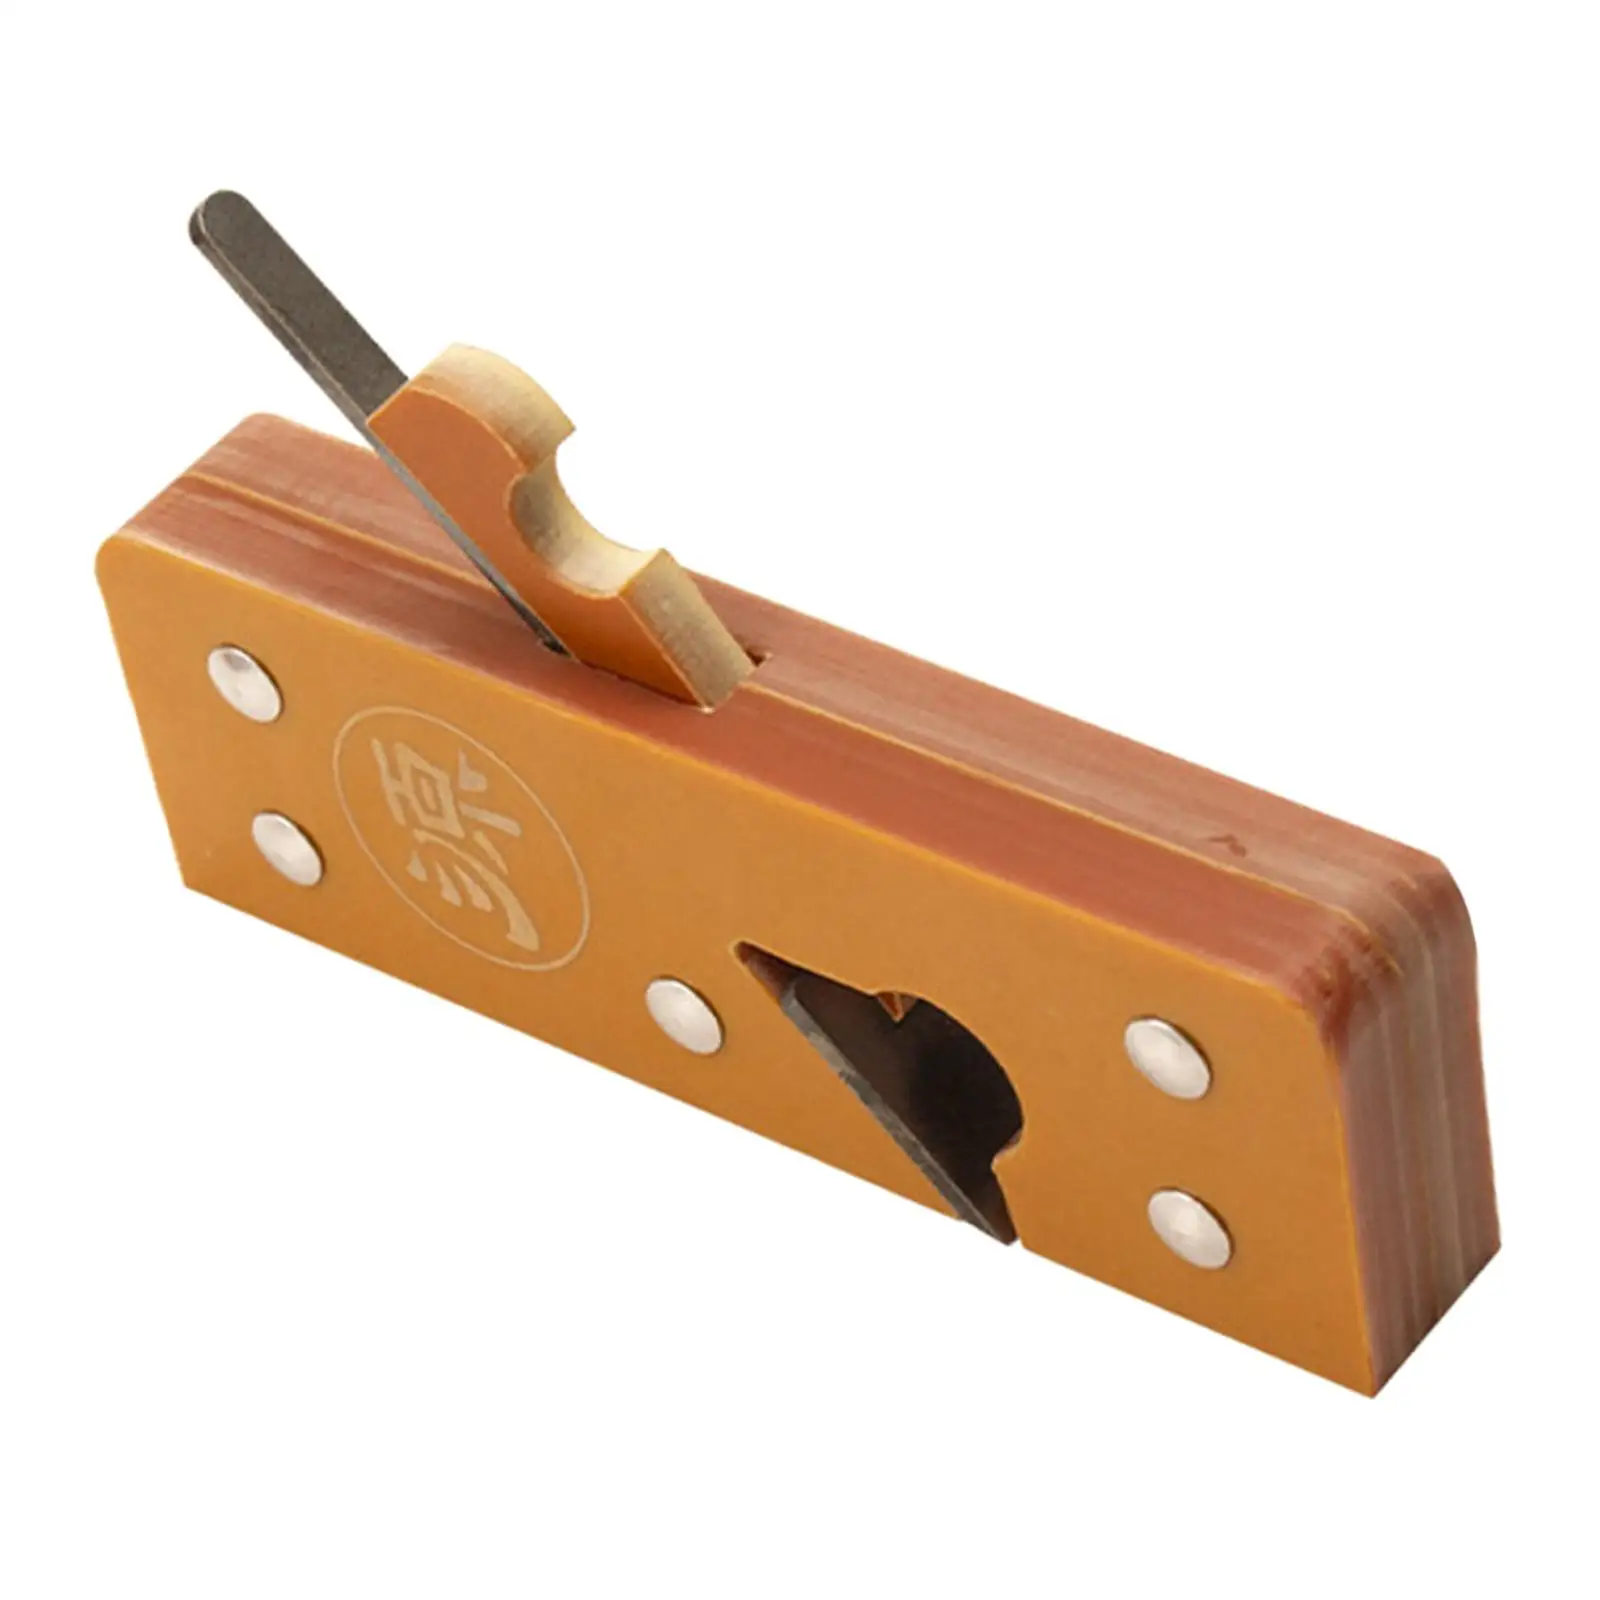 Portable Wood Plane Mini Carpenter Grooving Trimming Planer Adjustable Plane Manual Wrench Woodworking Tool